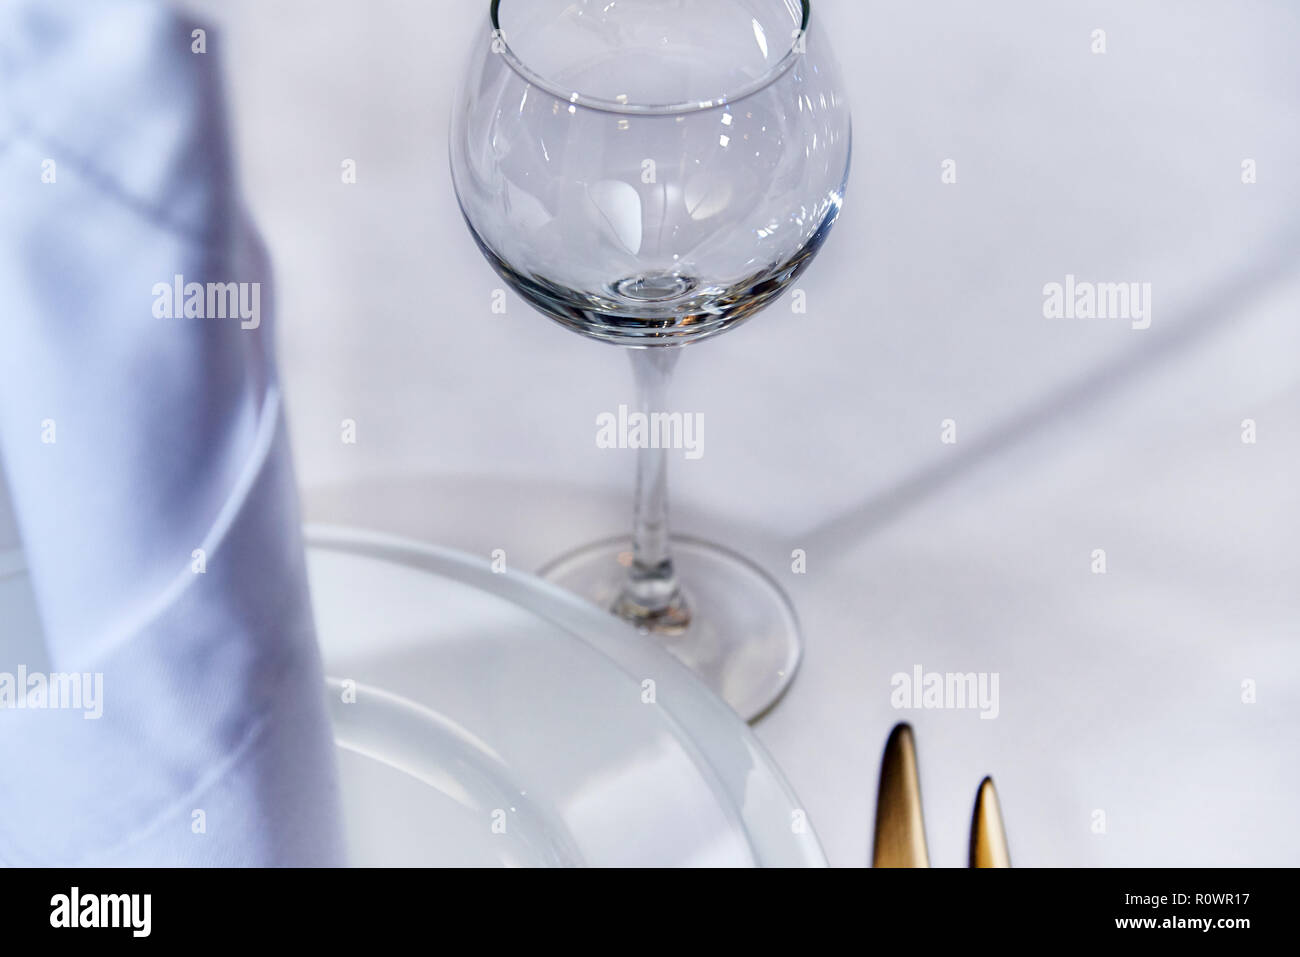 An empty glass near the plate with a napkin on a served table. Stock Photo